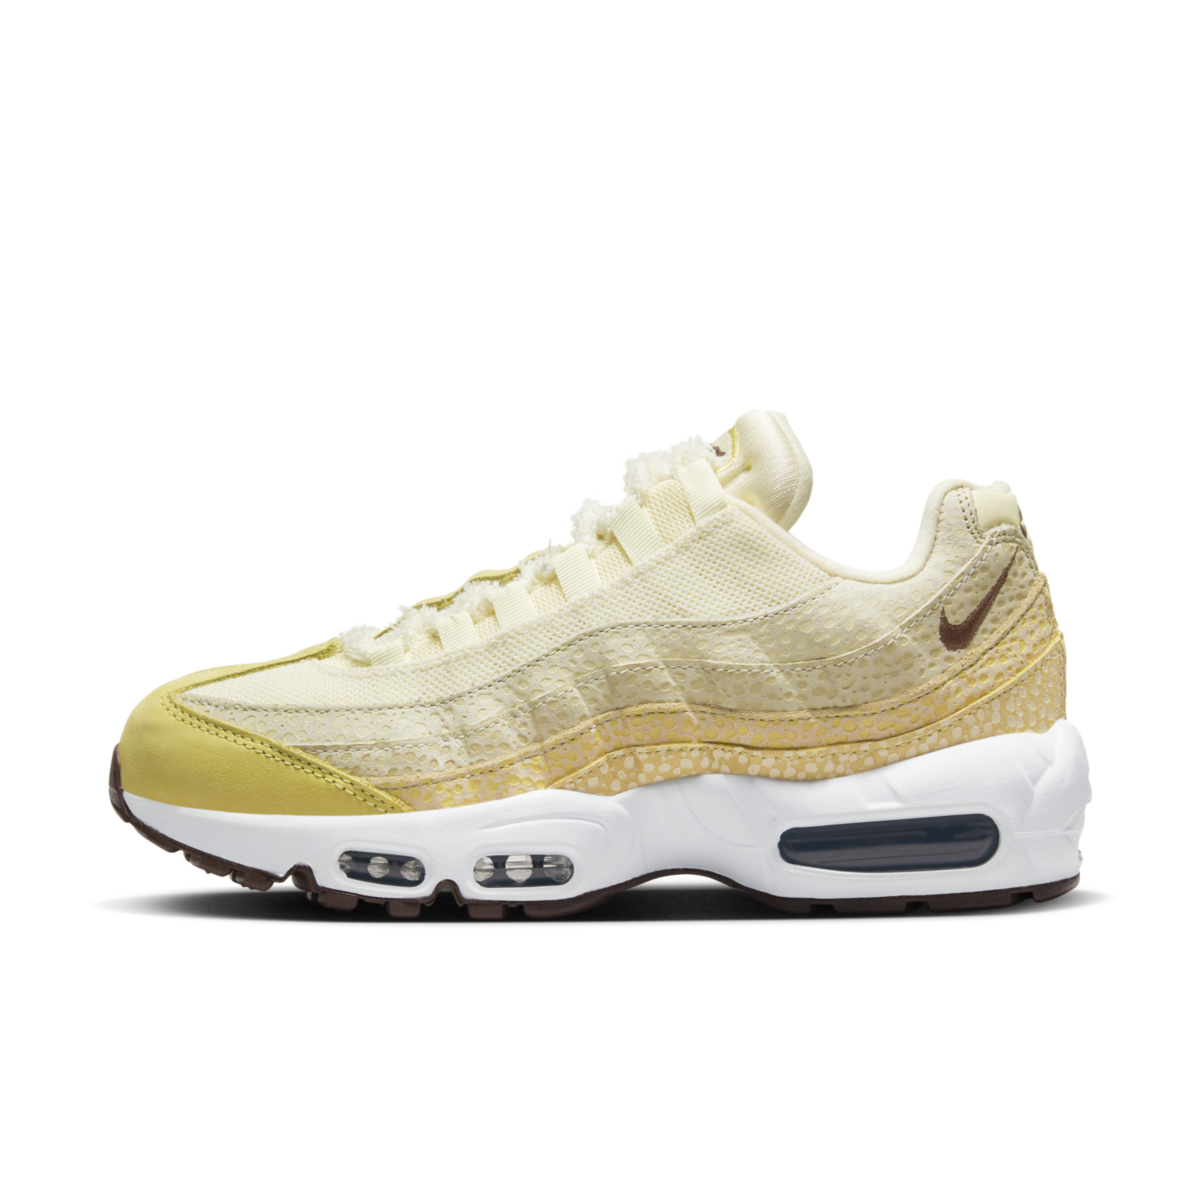 Nike Air Max 95 WMNS 'Saturn Gold and Alabaster'